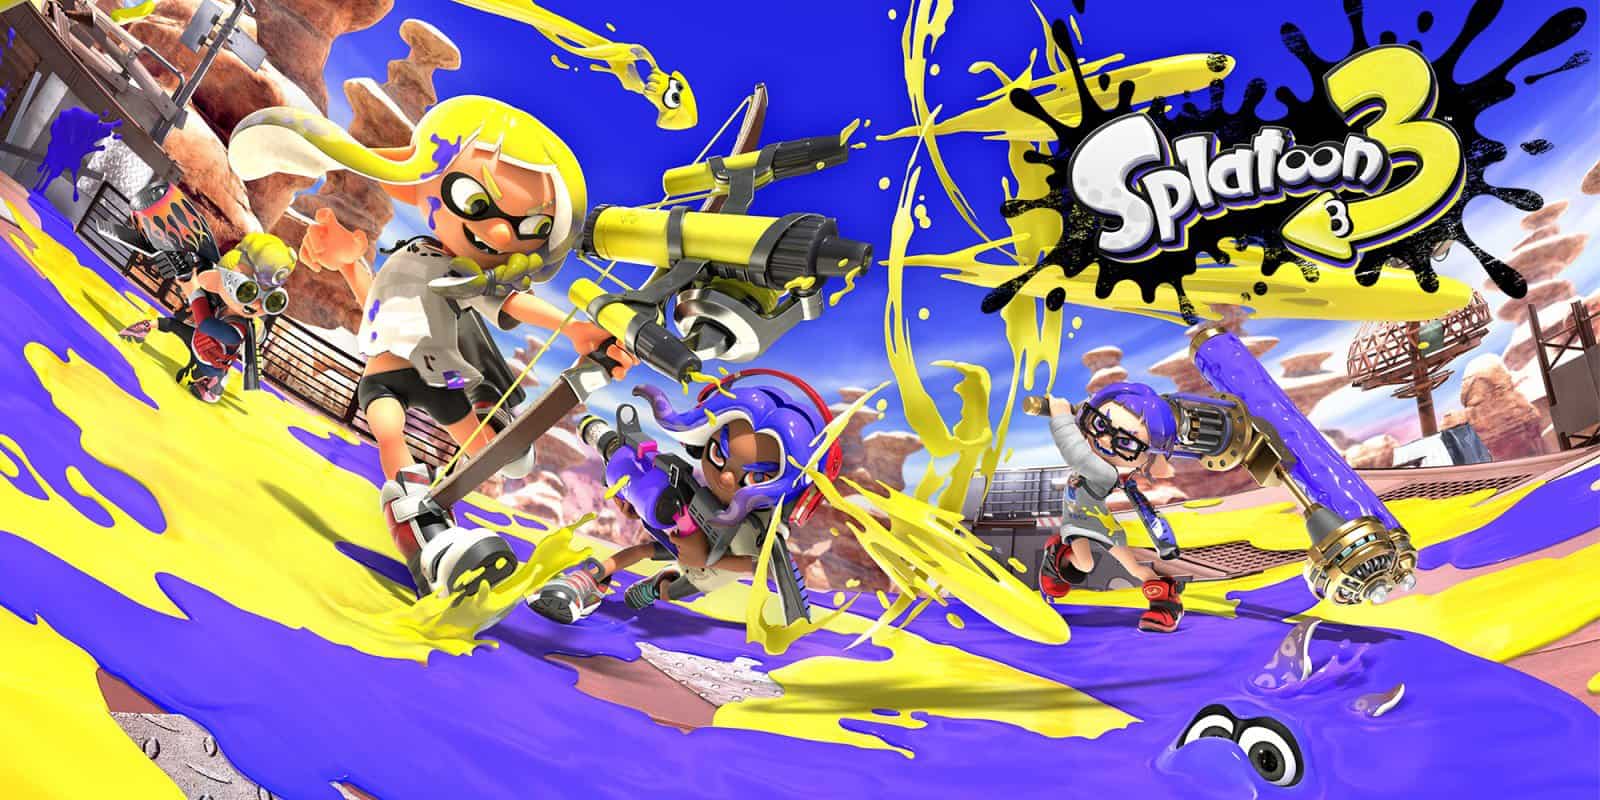 Splatoon 3 Amiibo Pre Order Details: Are They Live?